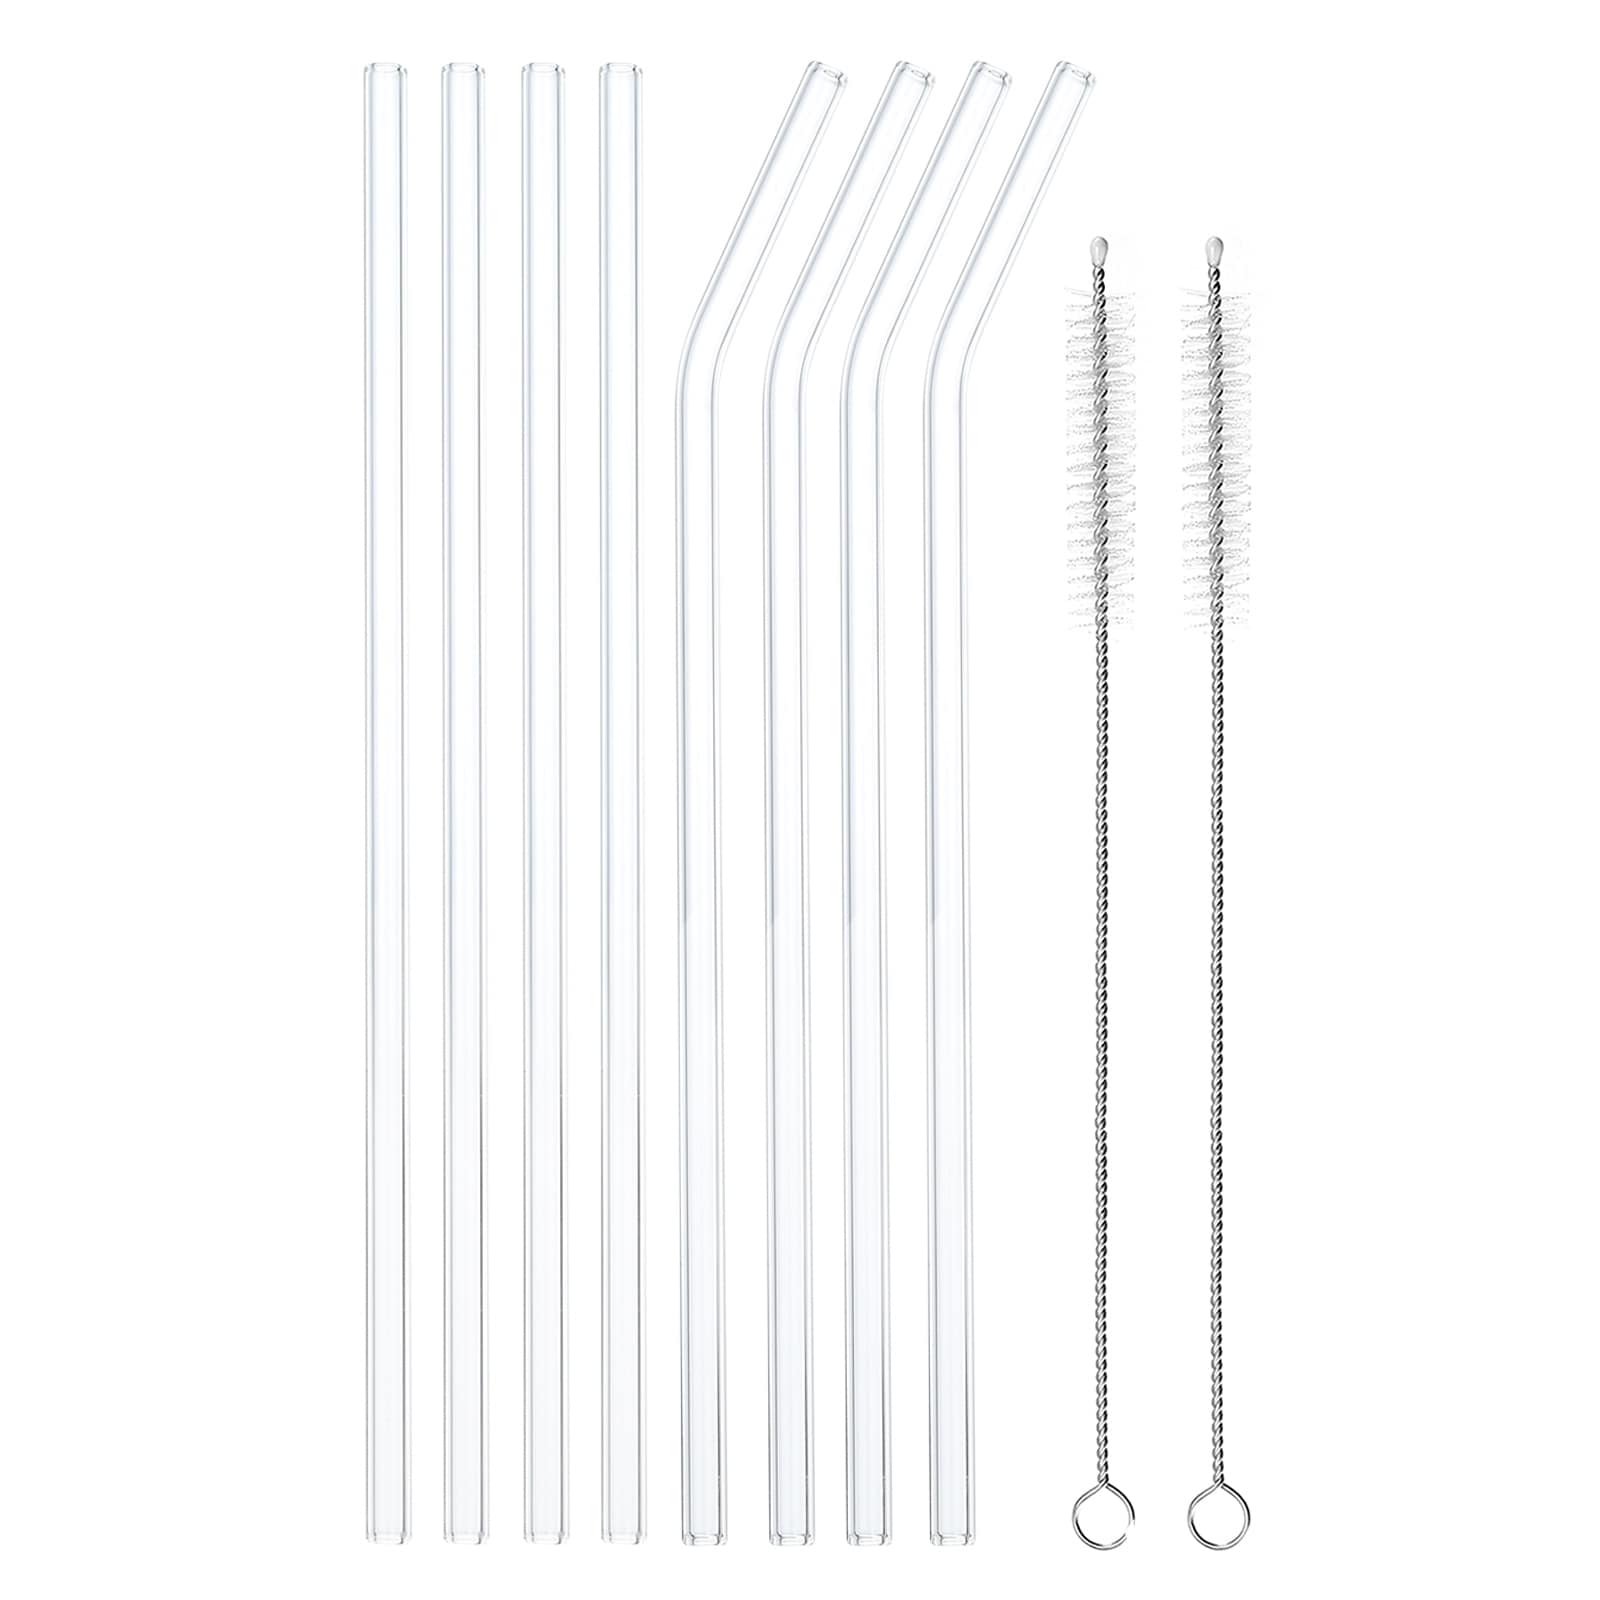  10 Pcs Reusable Glass Straw with Turtle Clear Straws